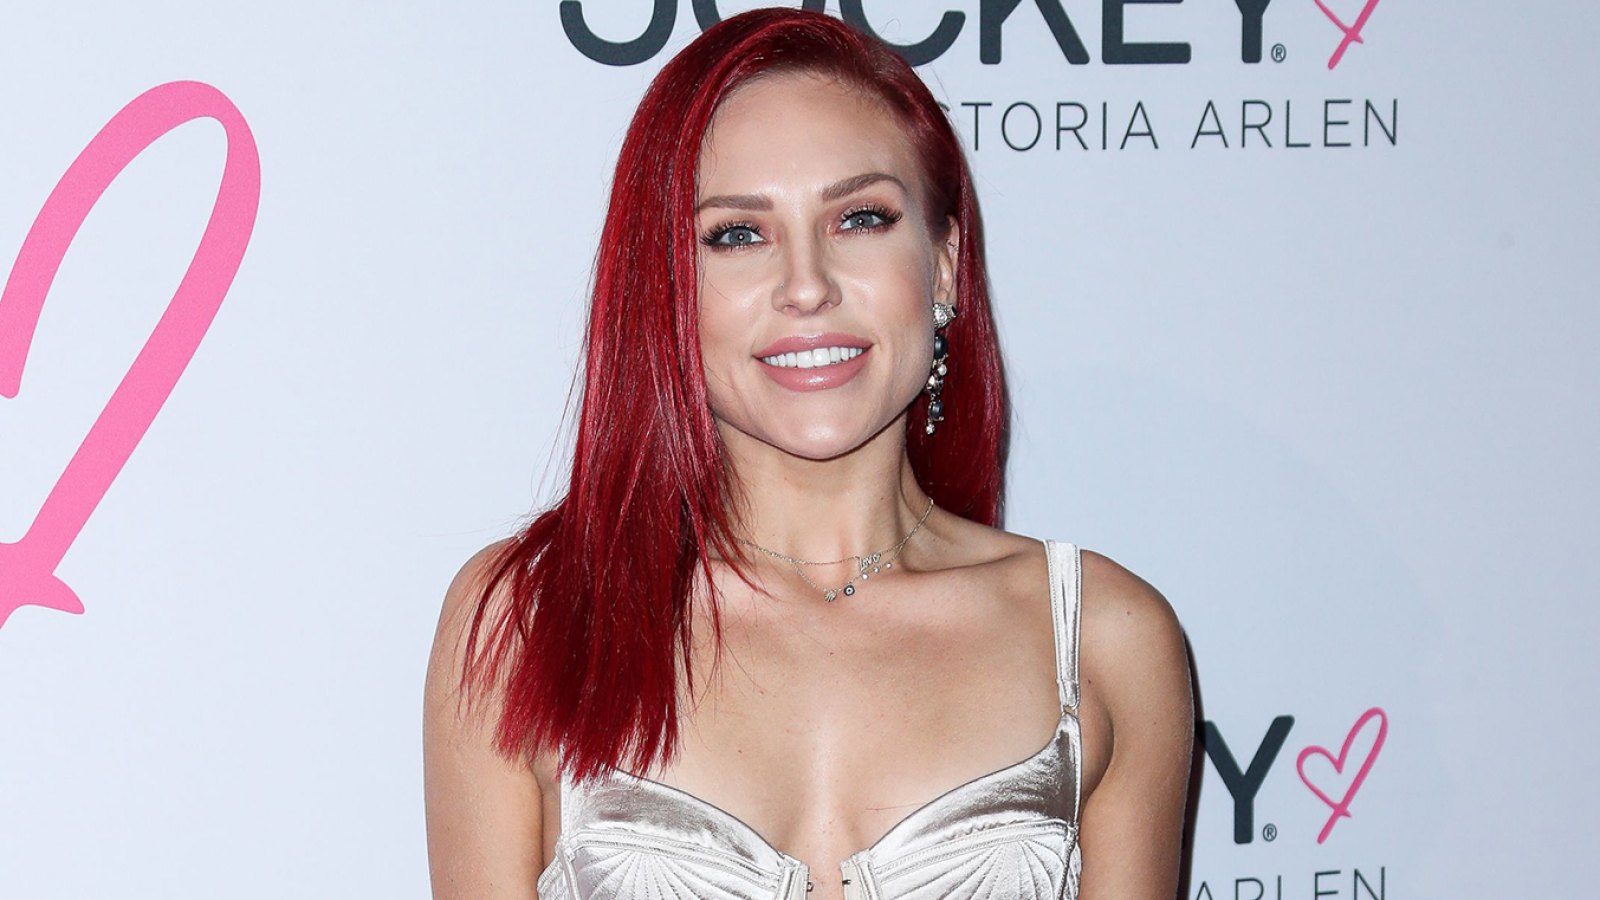 DWTS' Sharna Burgess Is ‘Over the Moon’ About 1st Pregnancy: 'Looking Forward to the Journey'